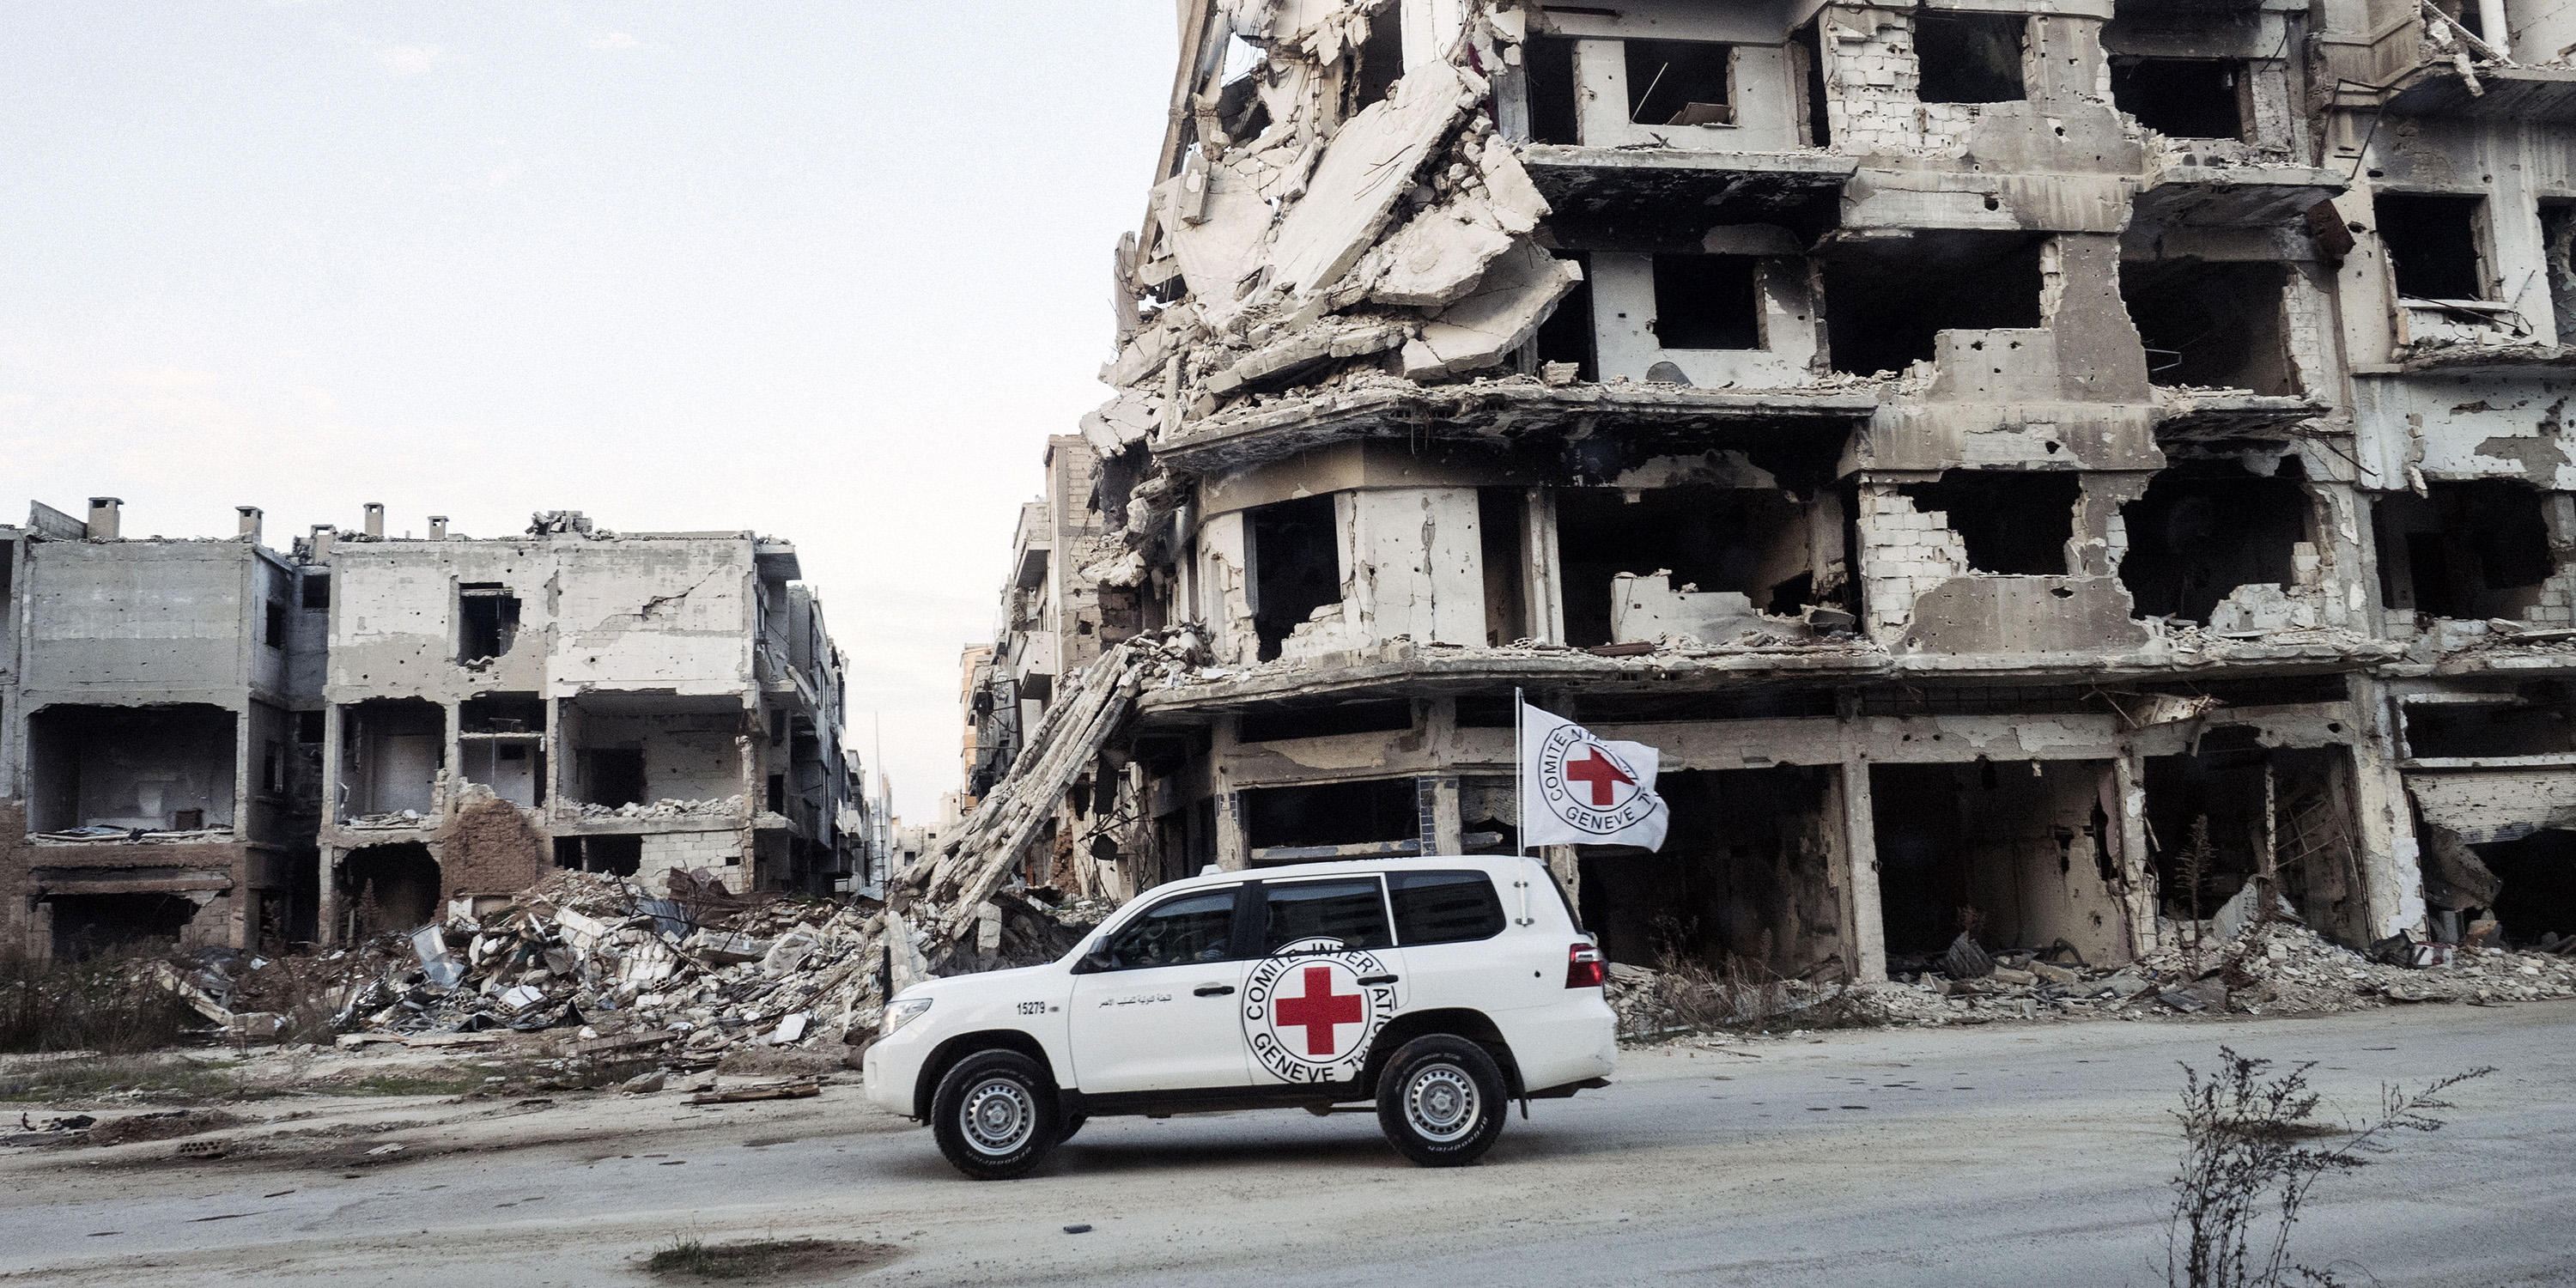 An ICRC car in front of a destroyed house facade